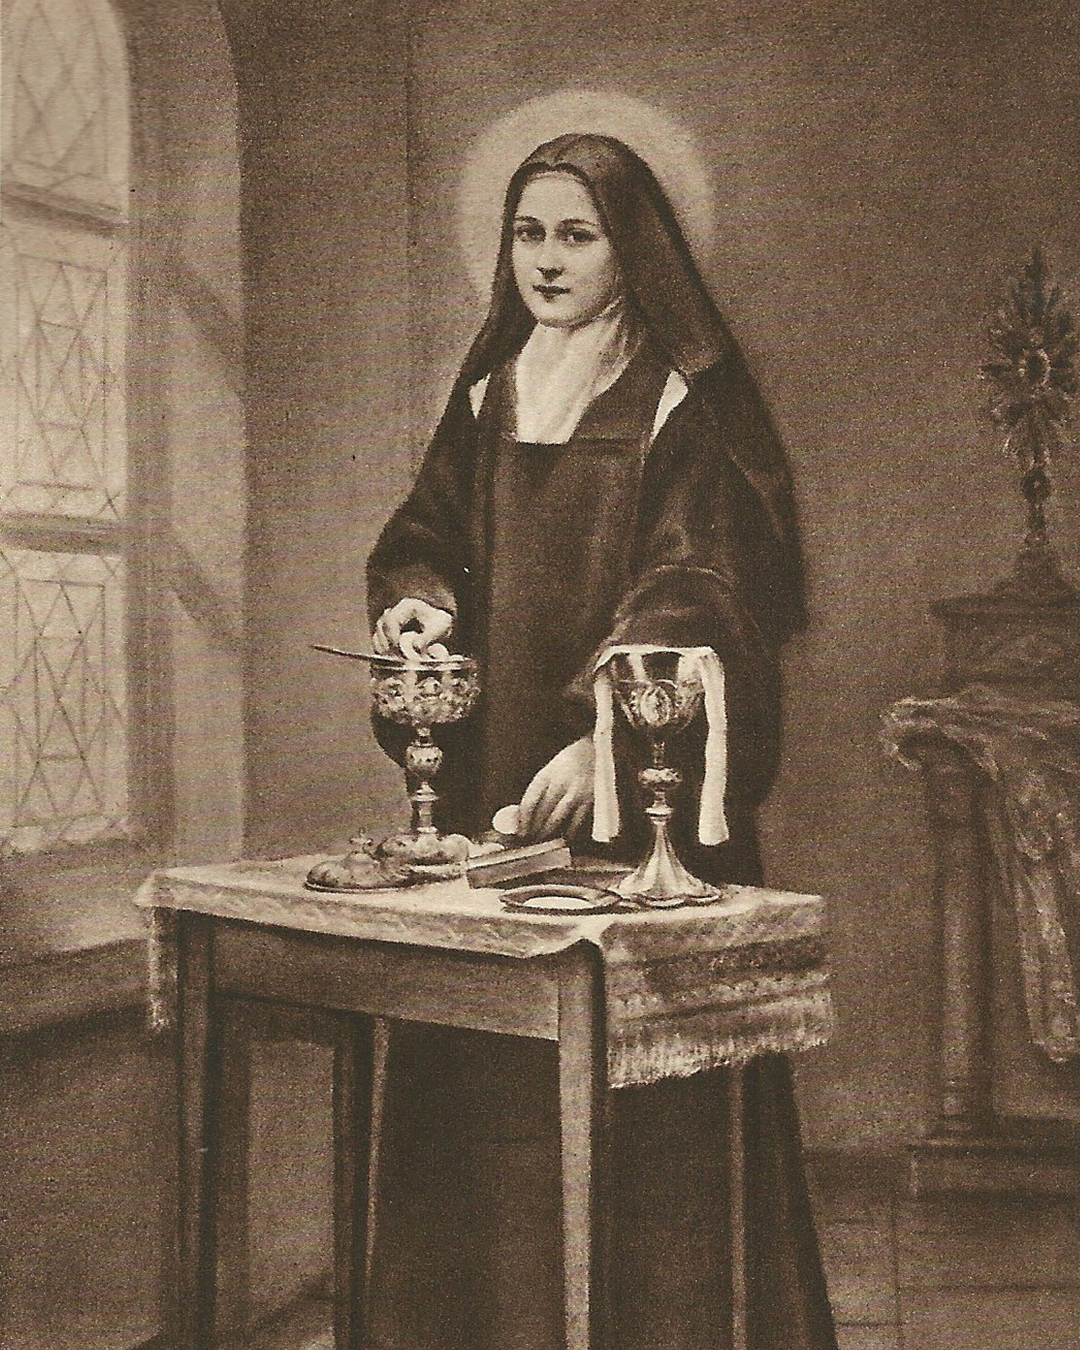 Portrait of St. Therese posed over a prayer table.